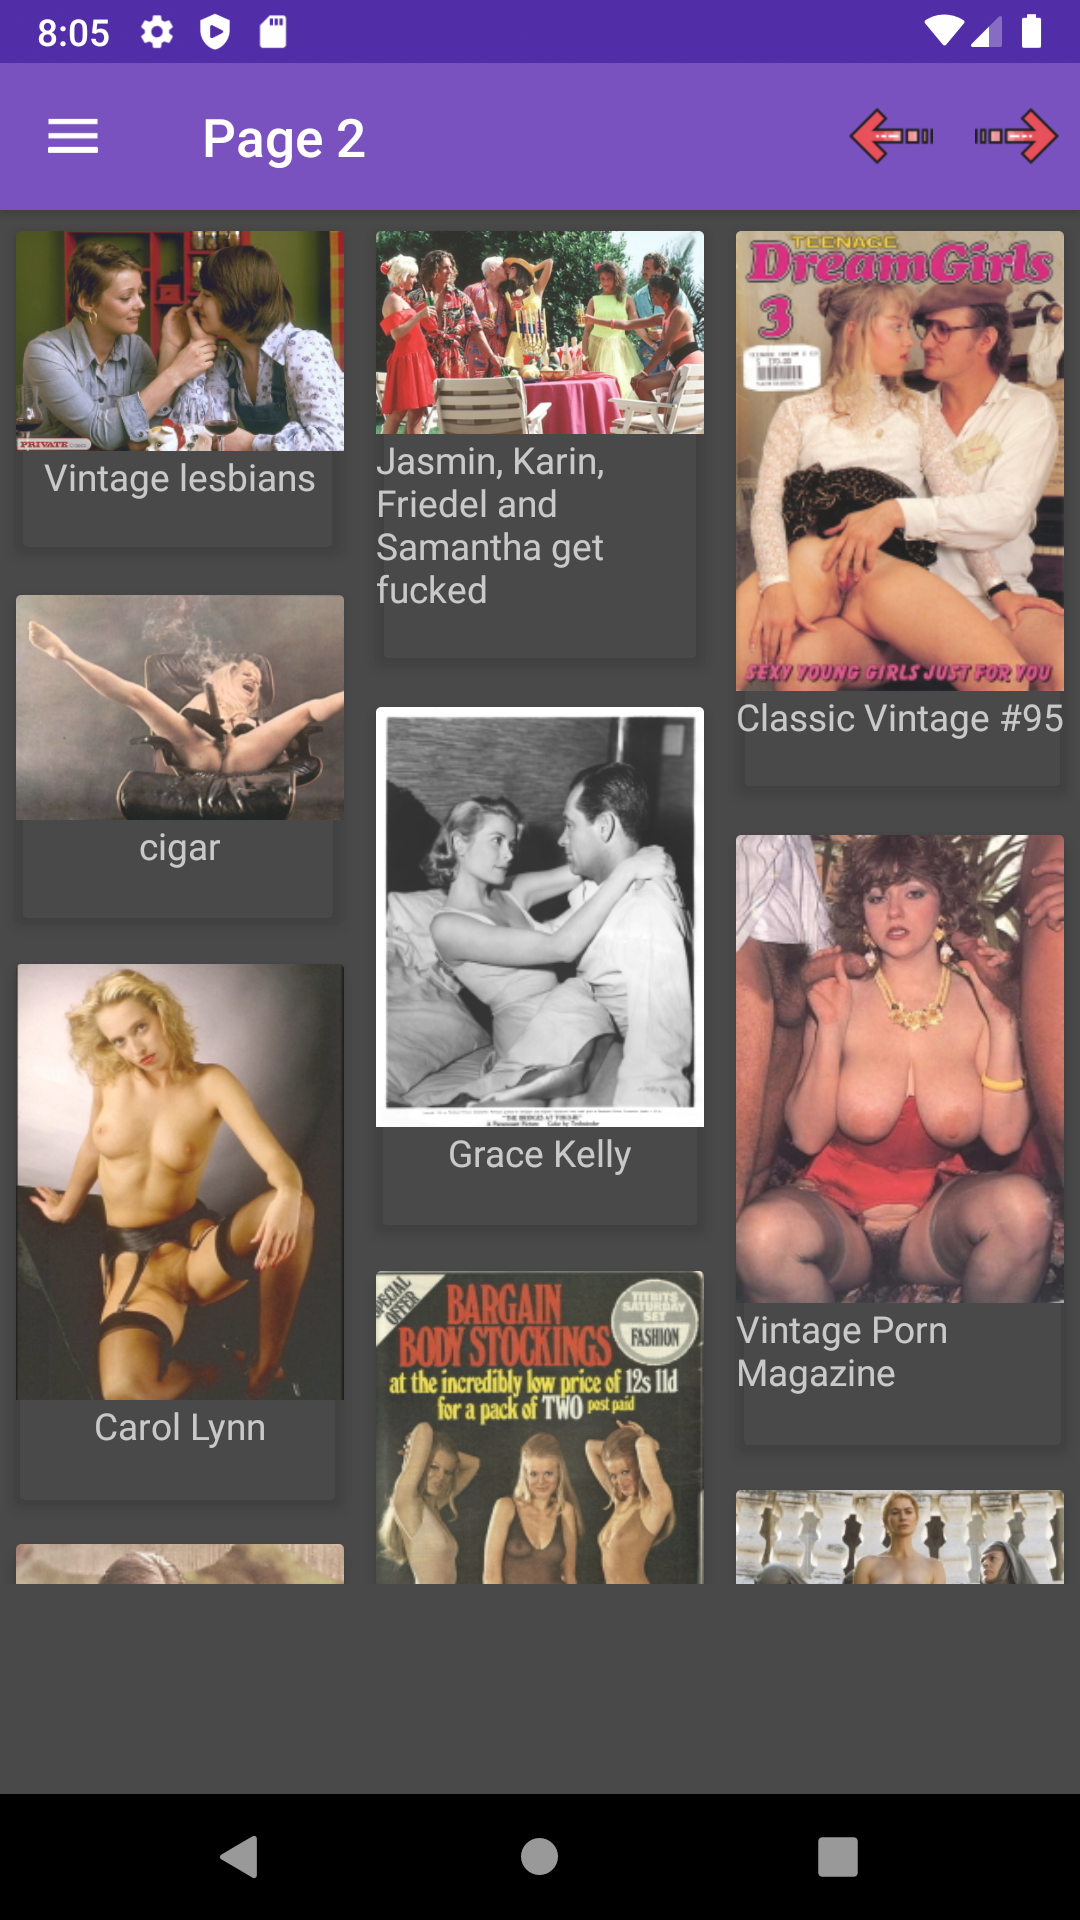 Vintage Porn hentei,manga,app,picture,sexy,phone,pic,maker,porn,cuckhold,apps,pictures,galleries,android,pics,photo,hot,apk,download,hentai,search,pornstars